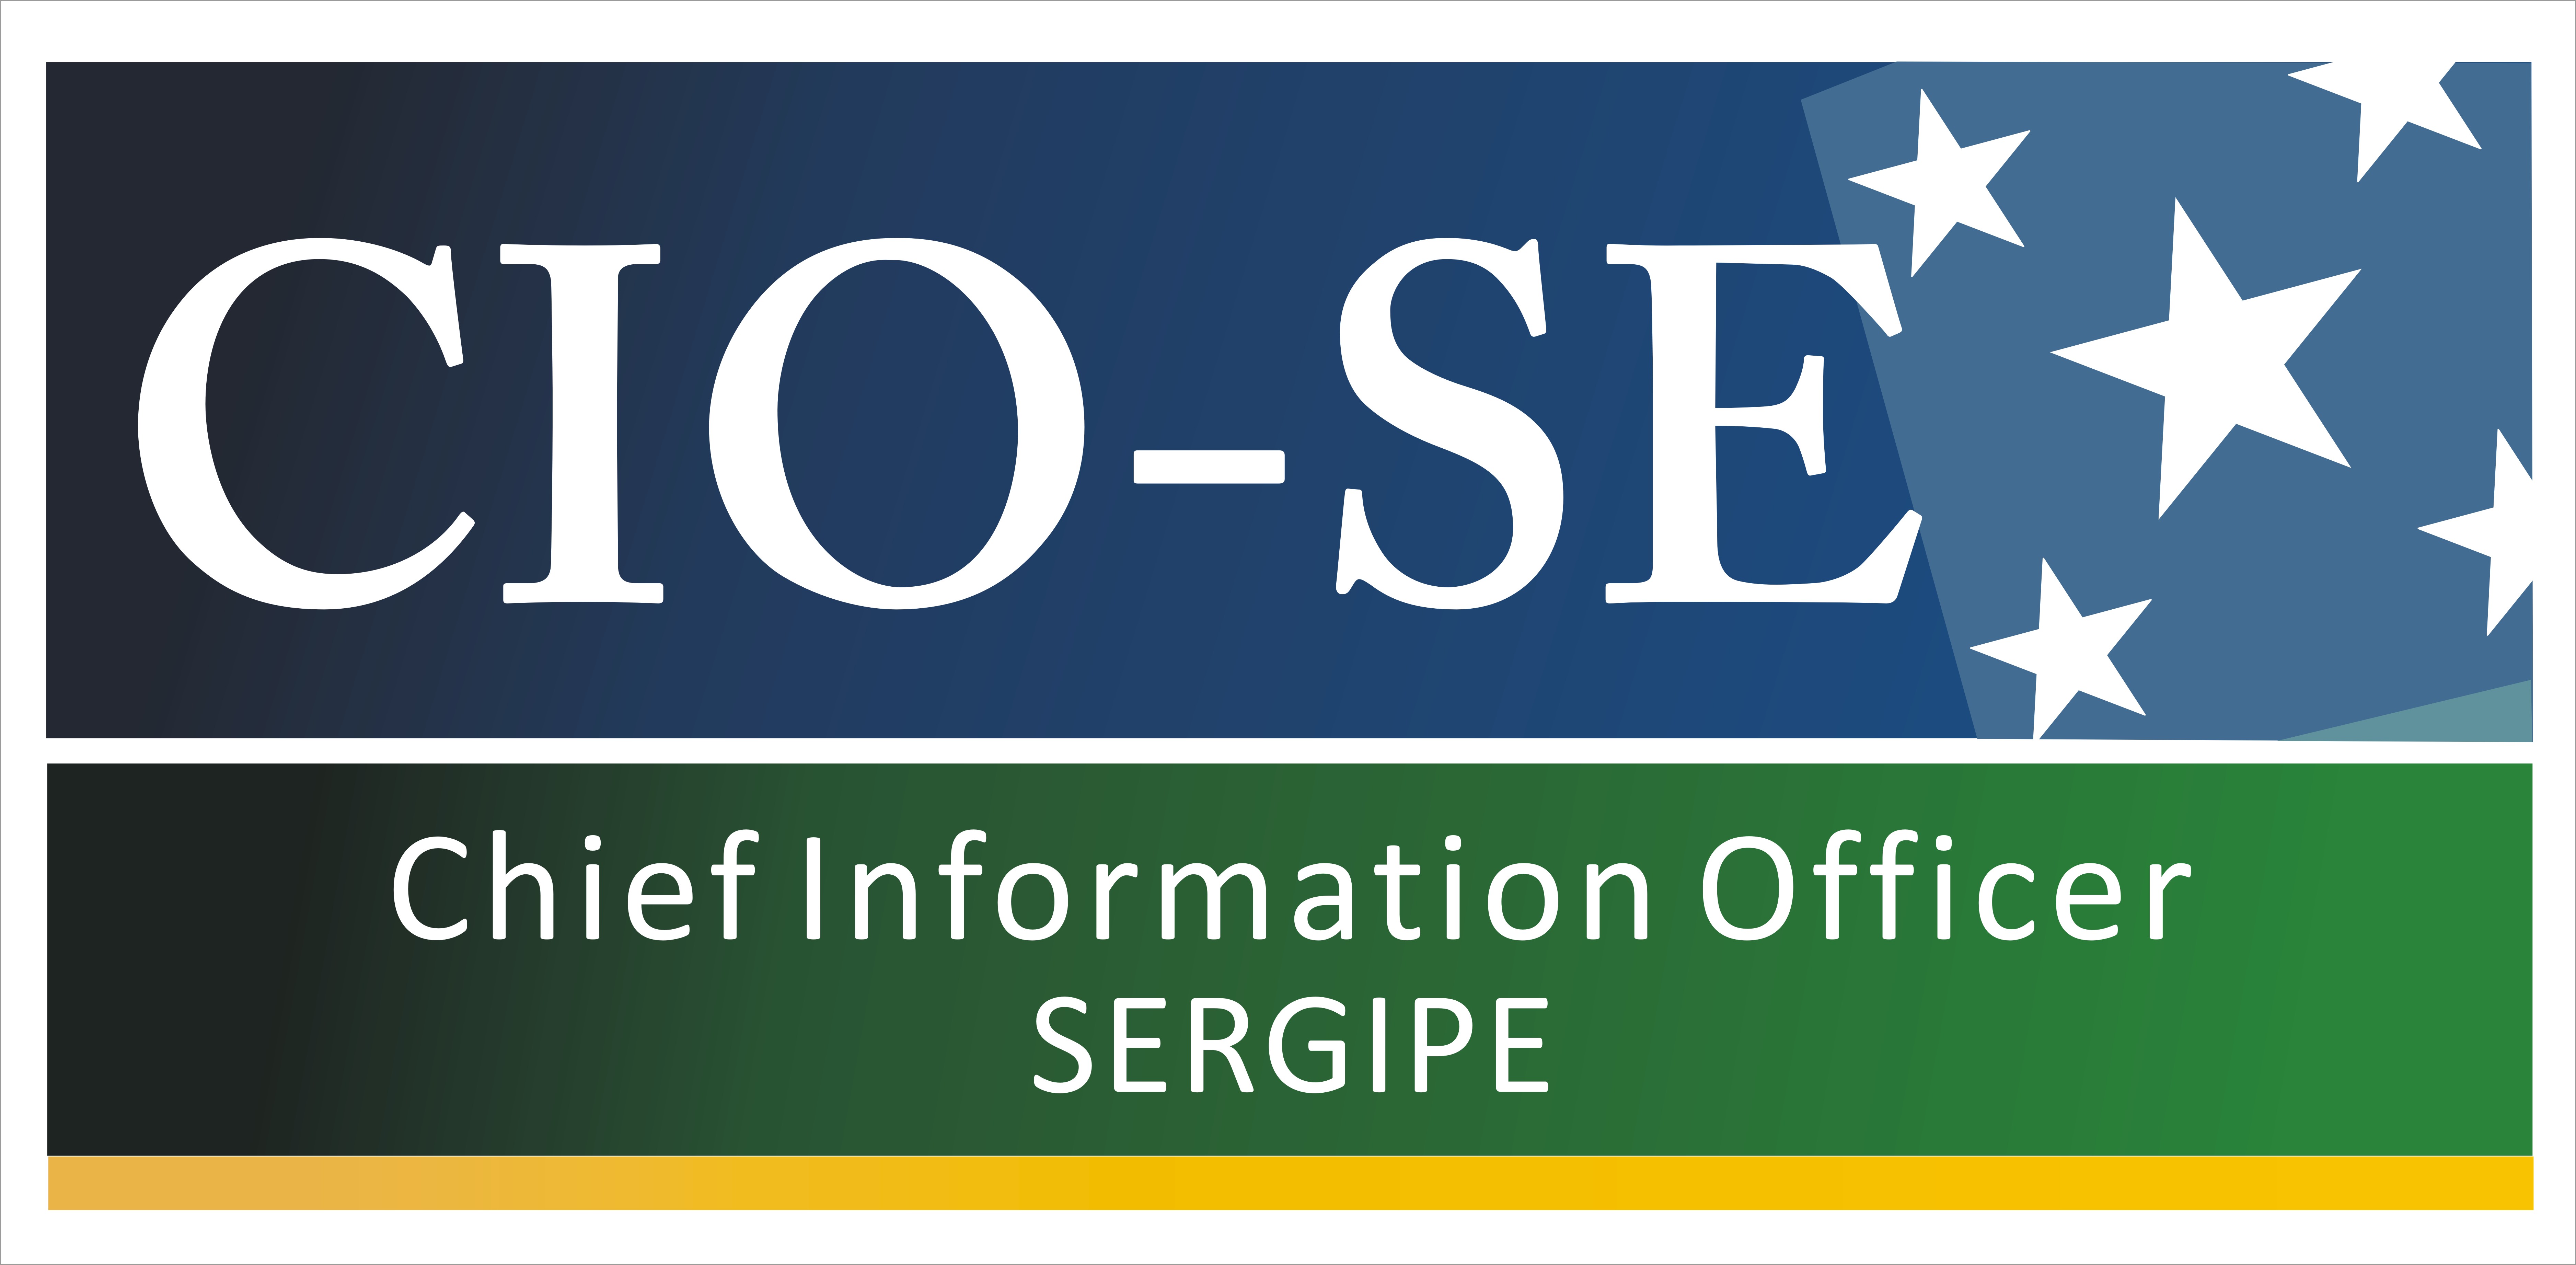 Chief Information Officer Sergipe